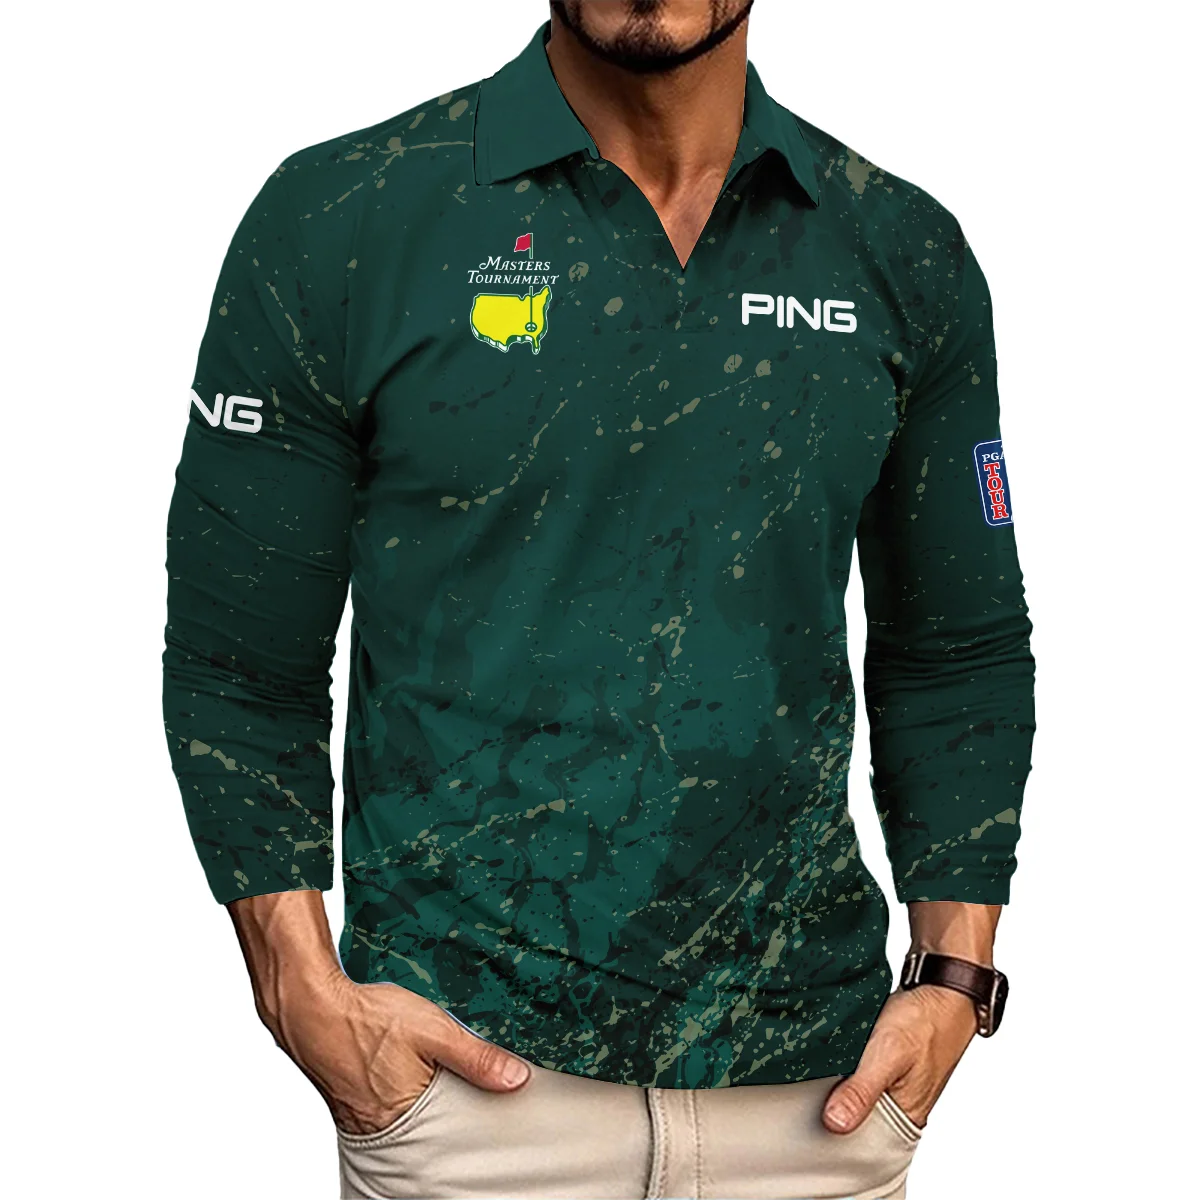 Old Cracked Texture With Gold Splash Paint Masters Tournament Ping Vneck Polo Shirt Style Classic Polo Shirt For Men